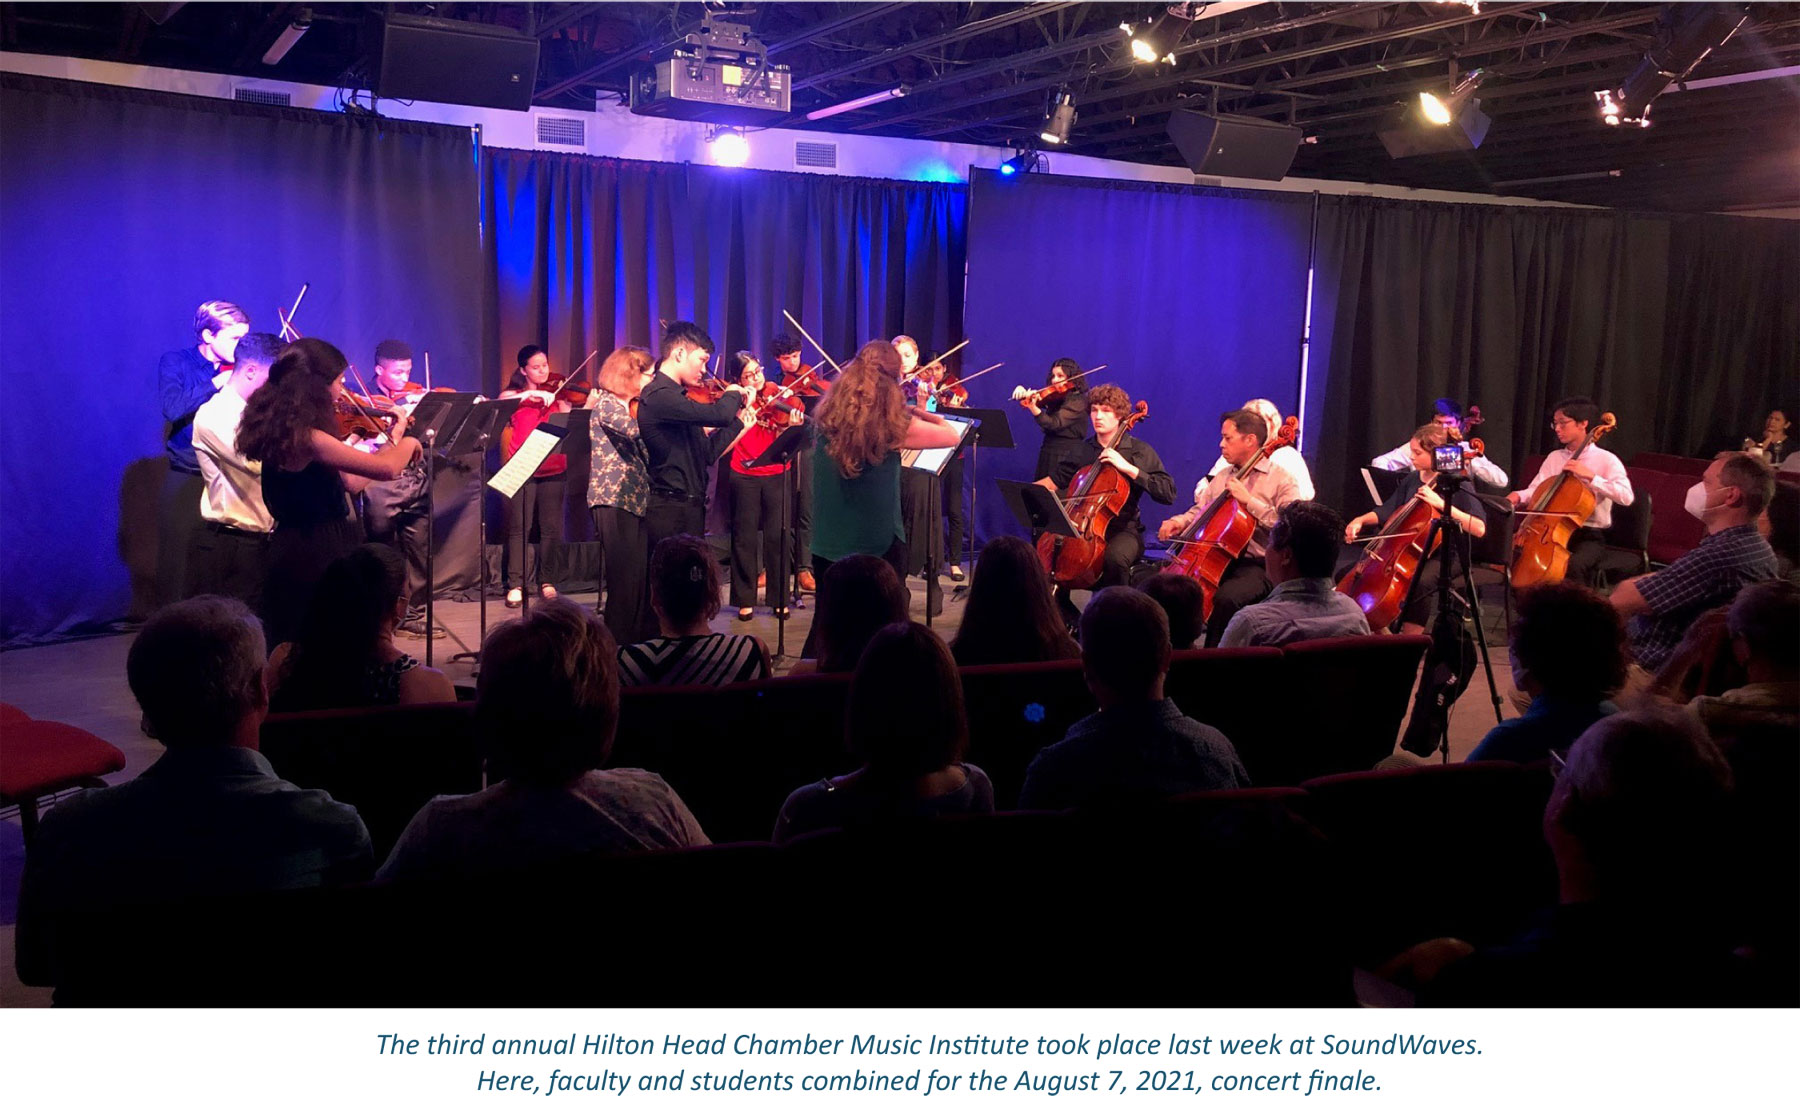 The third annual Hilton Head Chamber Music Institute took place last week at SoundWaves.   Here, faculty and students combined for the August 7, 2021, concert finale.